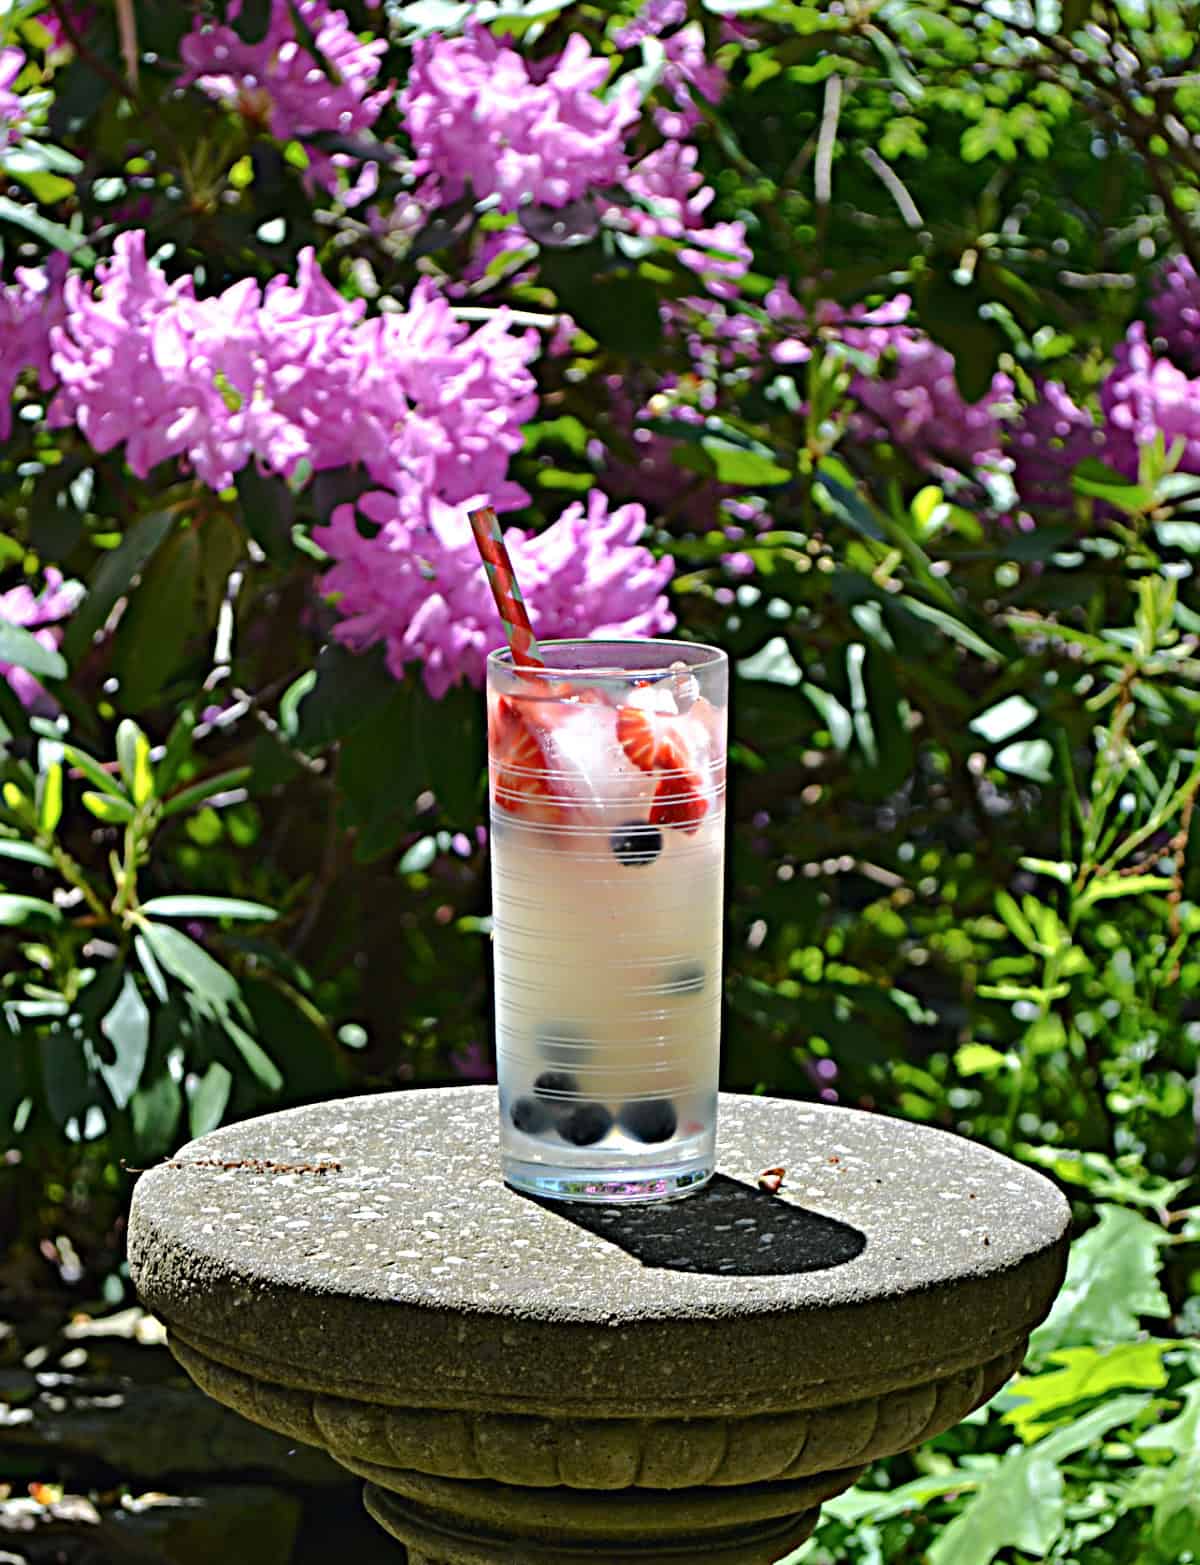 A glass of lemonade on a stone pedestal with pink flowers behind the glass.